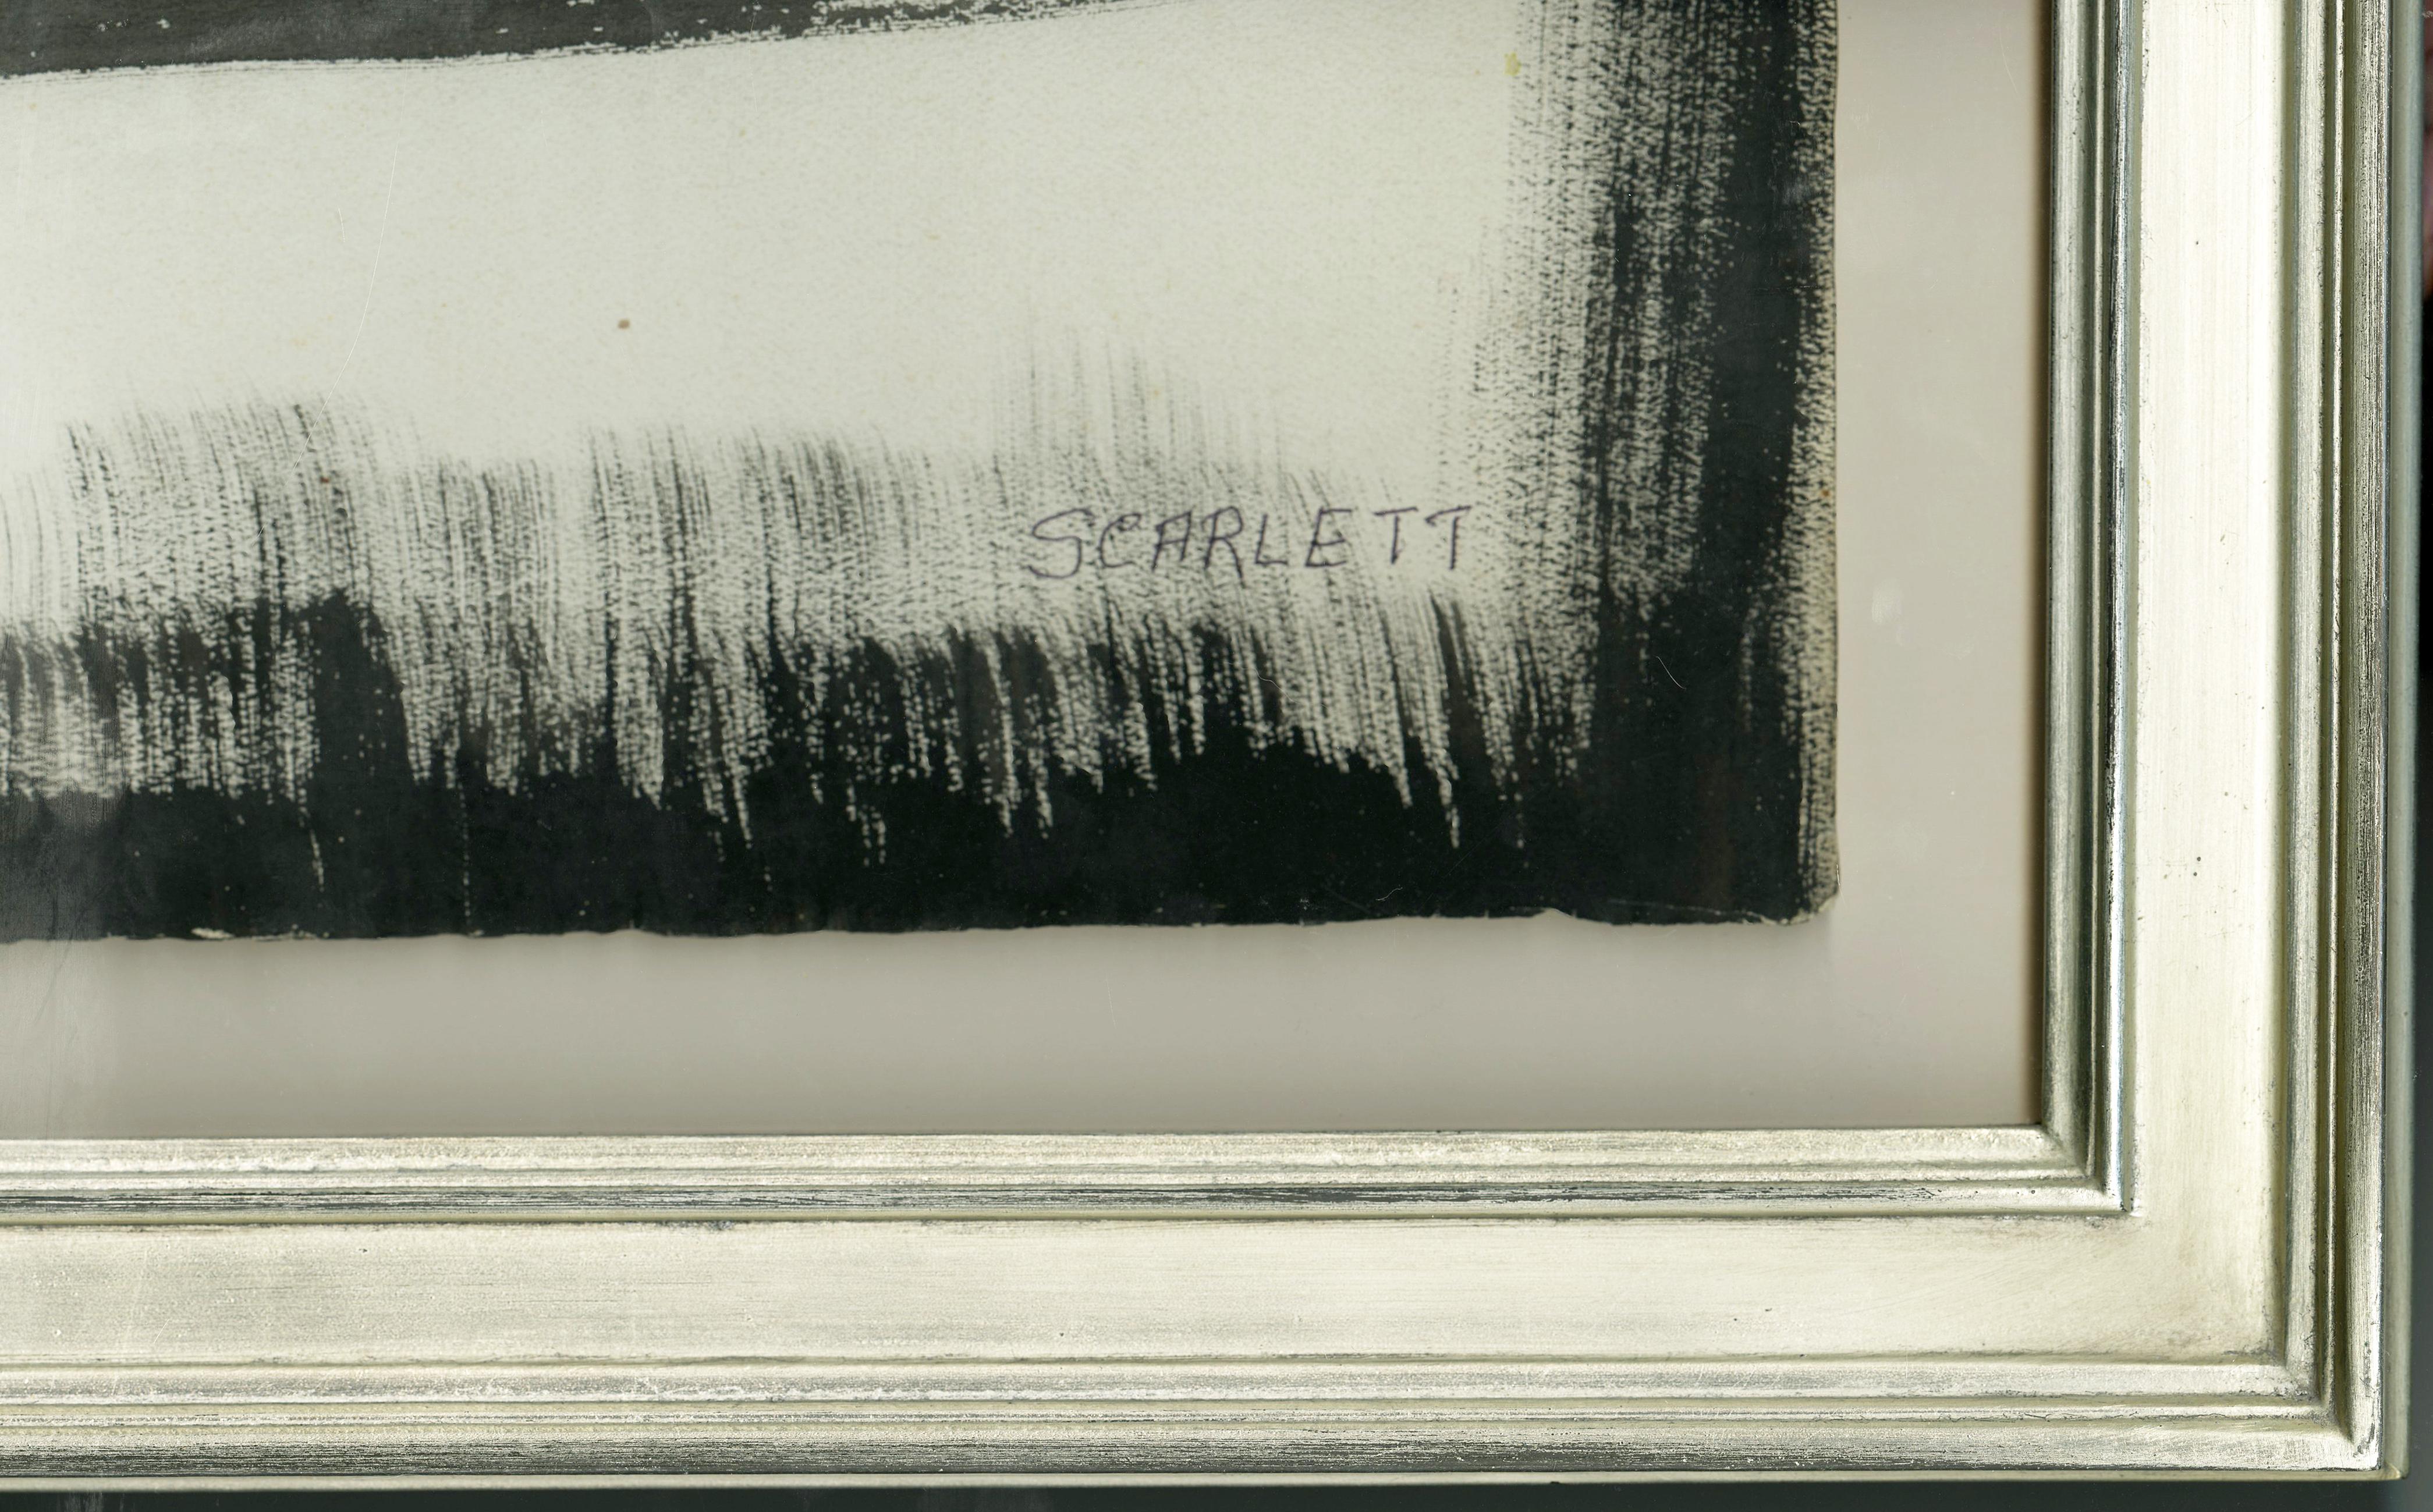 Untitled (Abstraction)
Ink on textured paper, c. 1958
Signed lower right: Scarlett
Note: A rare mid to late 1950s example of the artist's abstract expressionist style.
Provenance: Estate of the artist
Condition: Very good, slight adhesive on